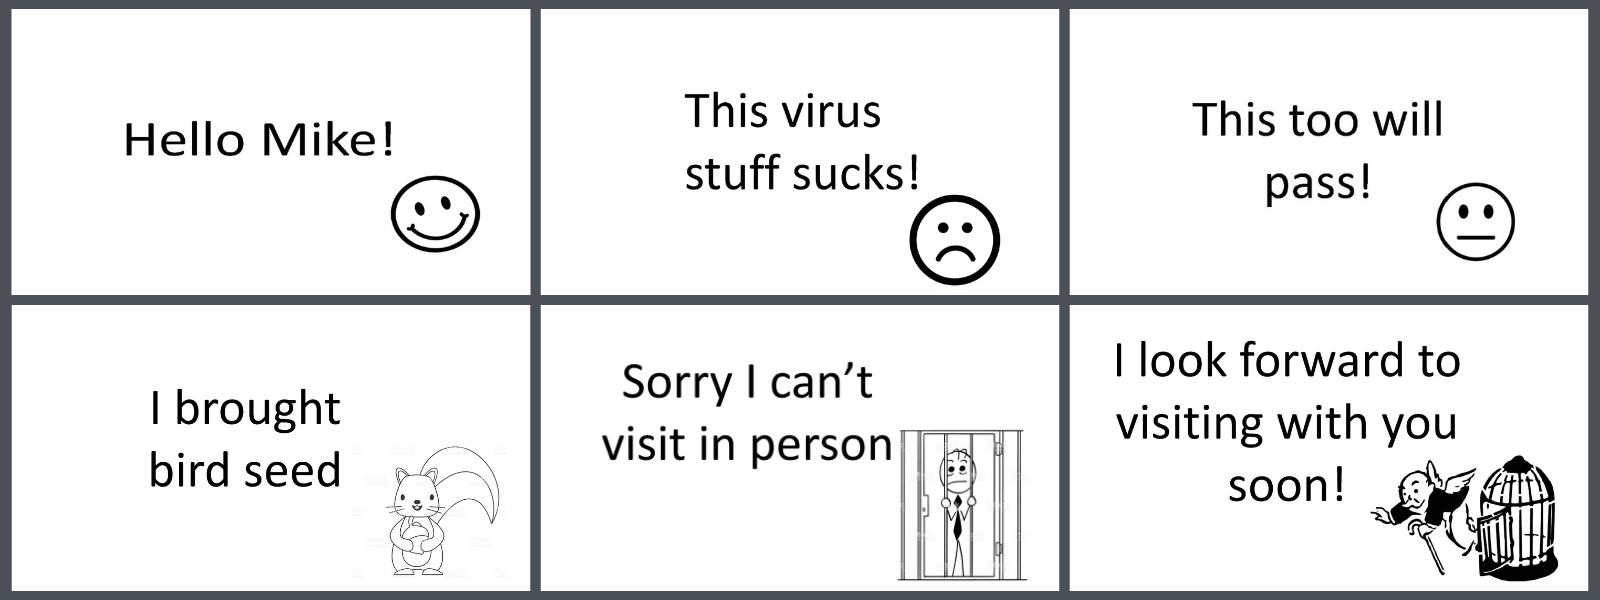 The words: "Hello Mike! This virus stuff sucks! this too will pass! i brought bird seed. Sorry I can't visit in person. I look forward to visiting with you soon!"